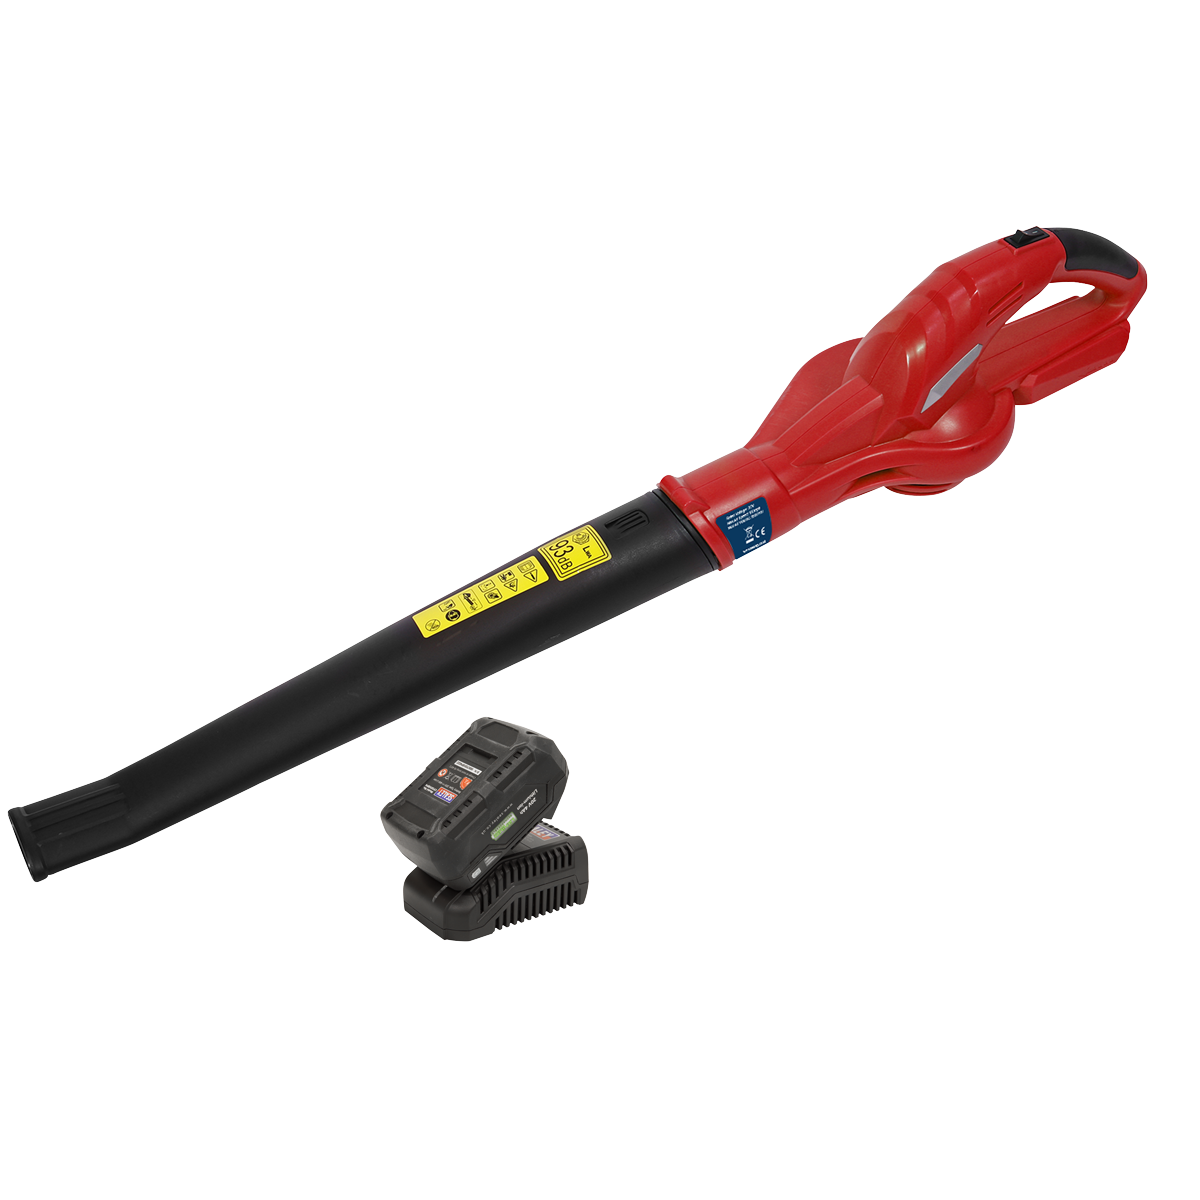 Leaf Blower Cordless 20V SV20 Series with 4Ah Battery & Charger - CB20VCOMBO4 - Farming Parts